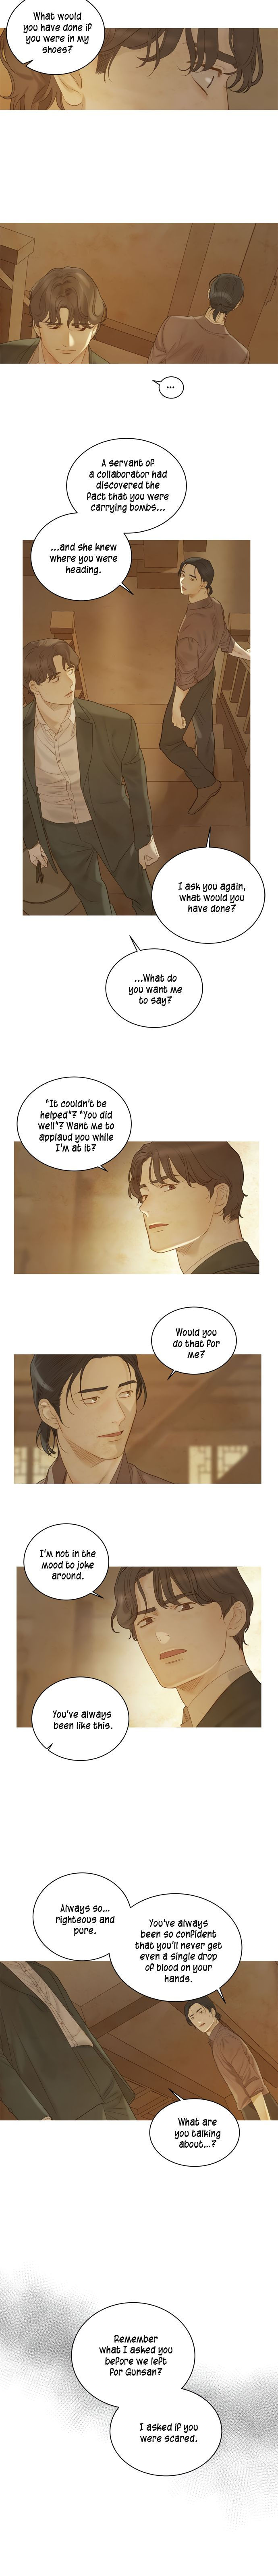 Gorae Byul - The Gyeongseong Mermaid - Chapter 21 Page 10